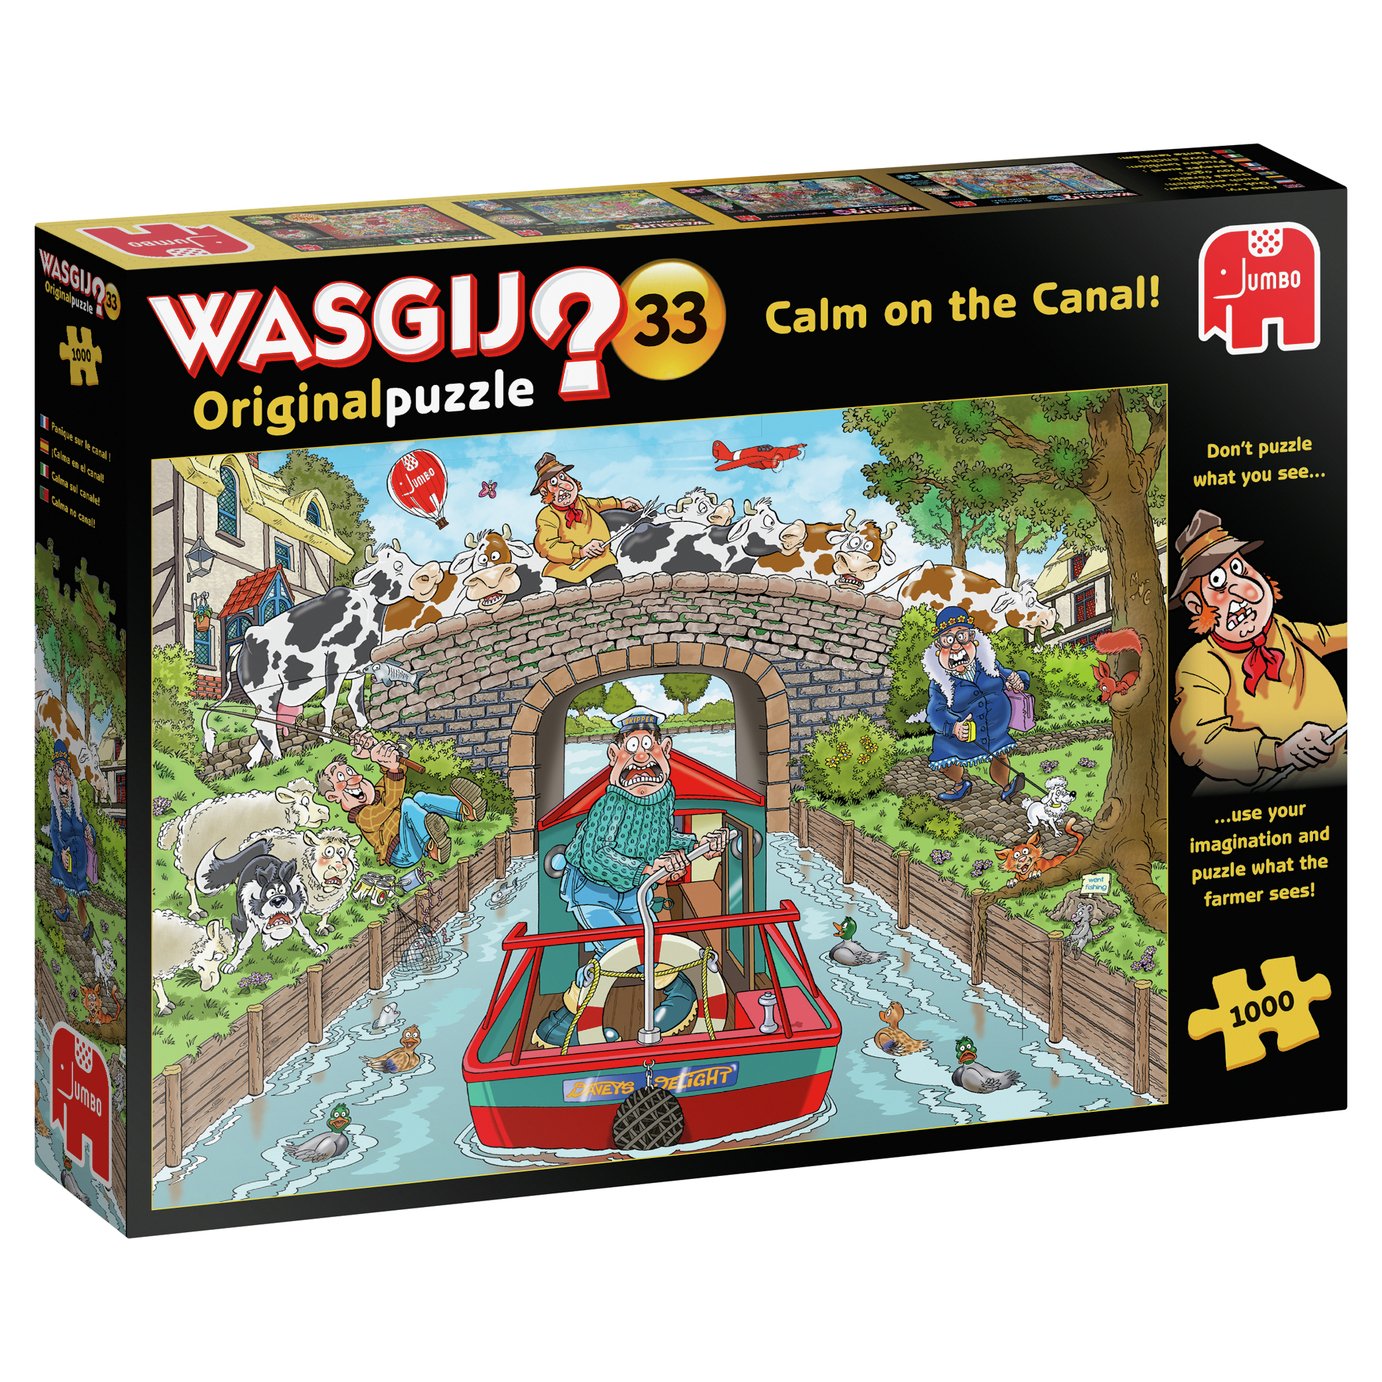 Wasgij Original 33: Calm on the Canal Review